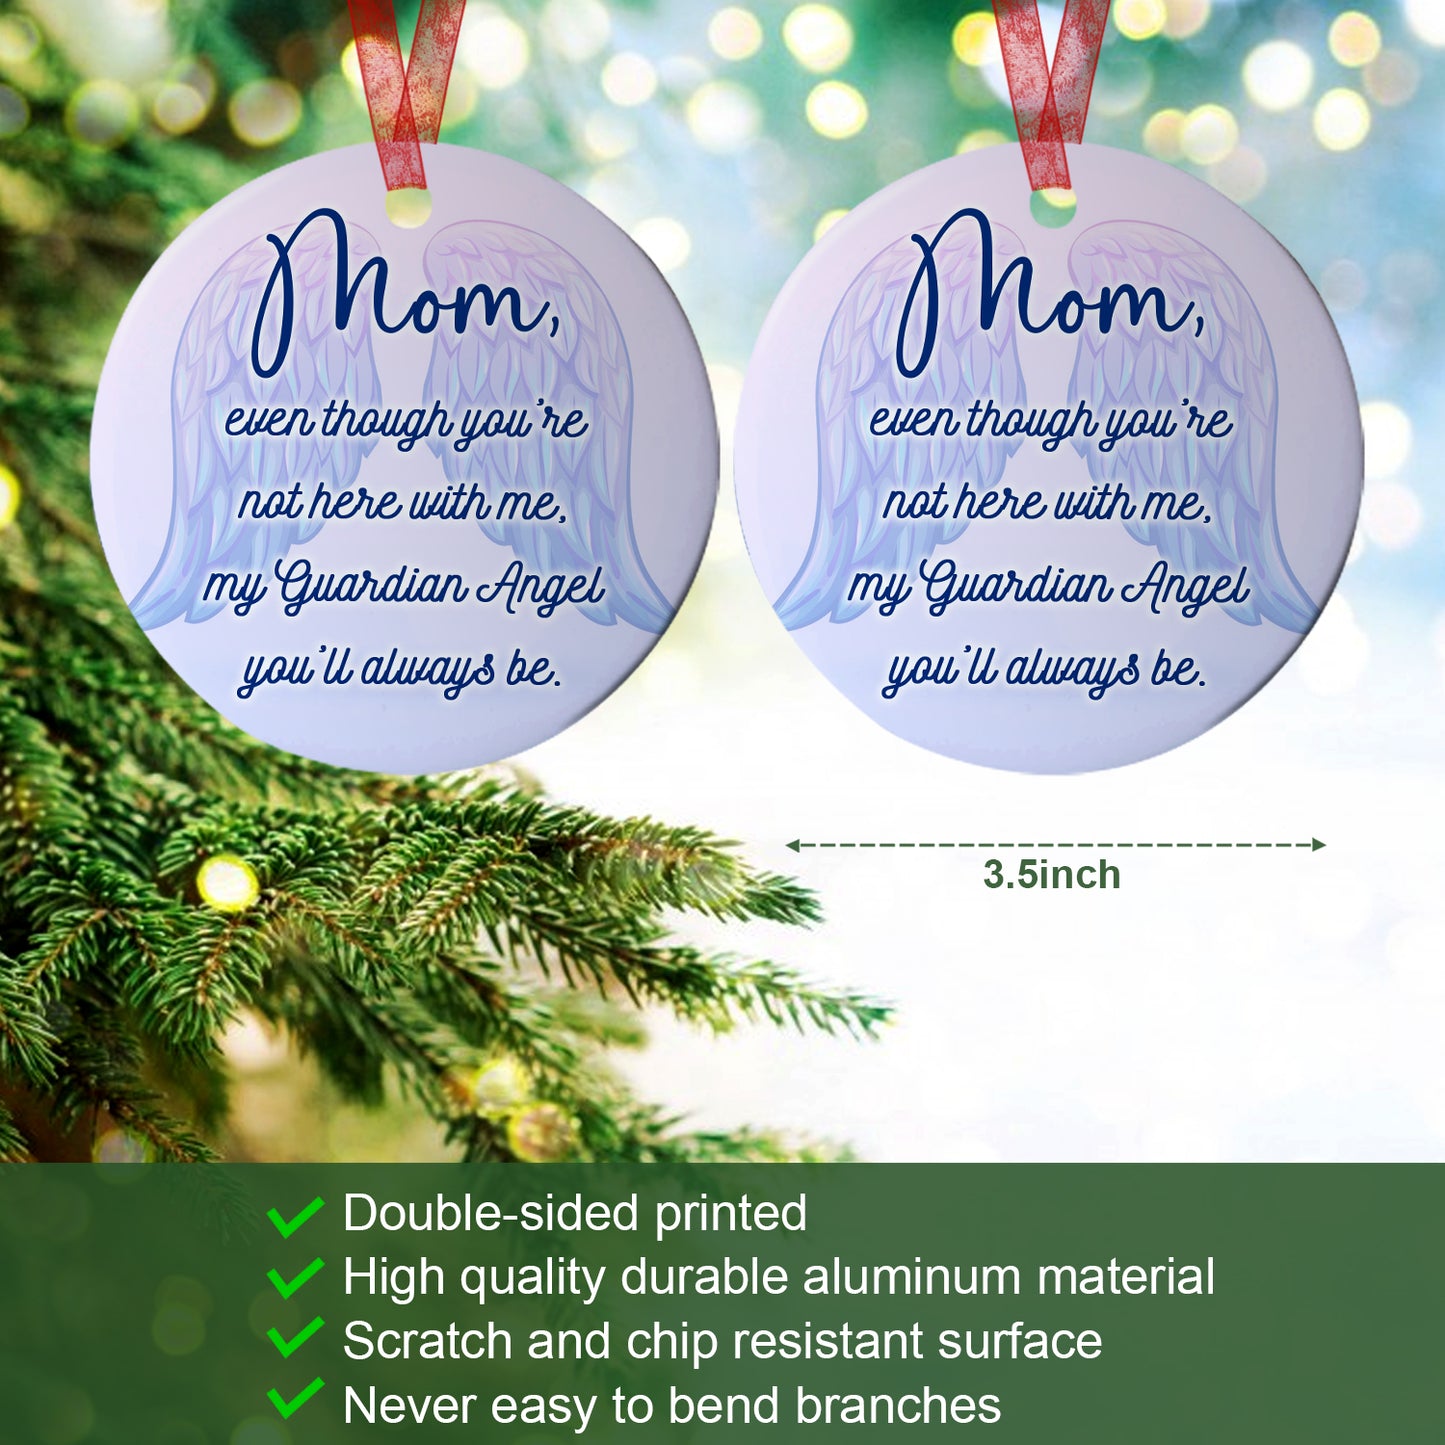 Mom Keepsake Ornament My Guardian Angel You're Always Be Ornament Memorial Gift For Loss Of Mother - Aluminum Metal Ornament